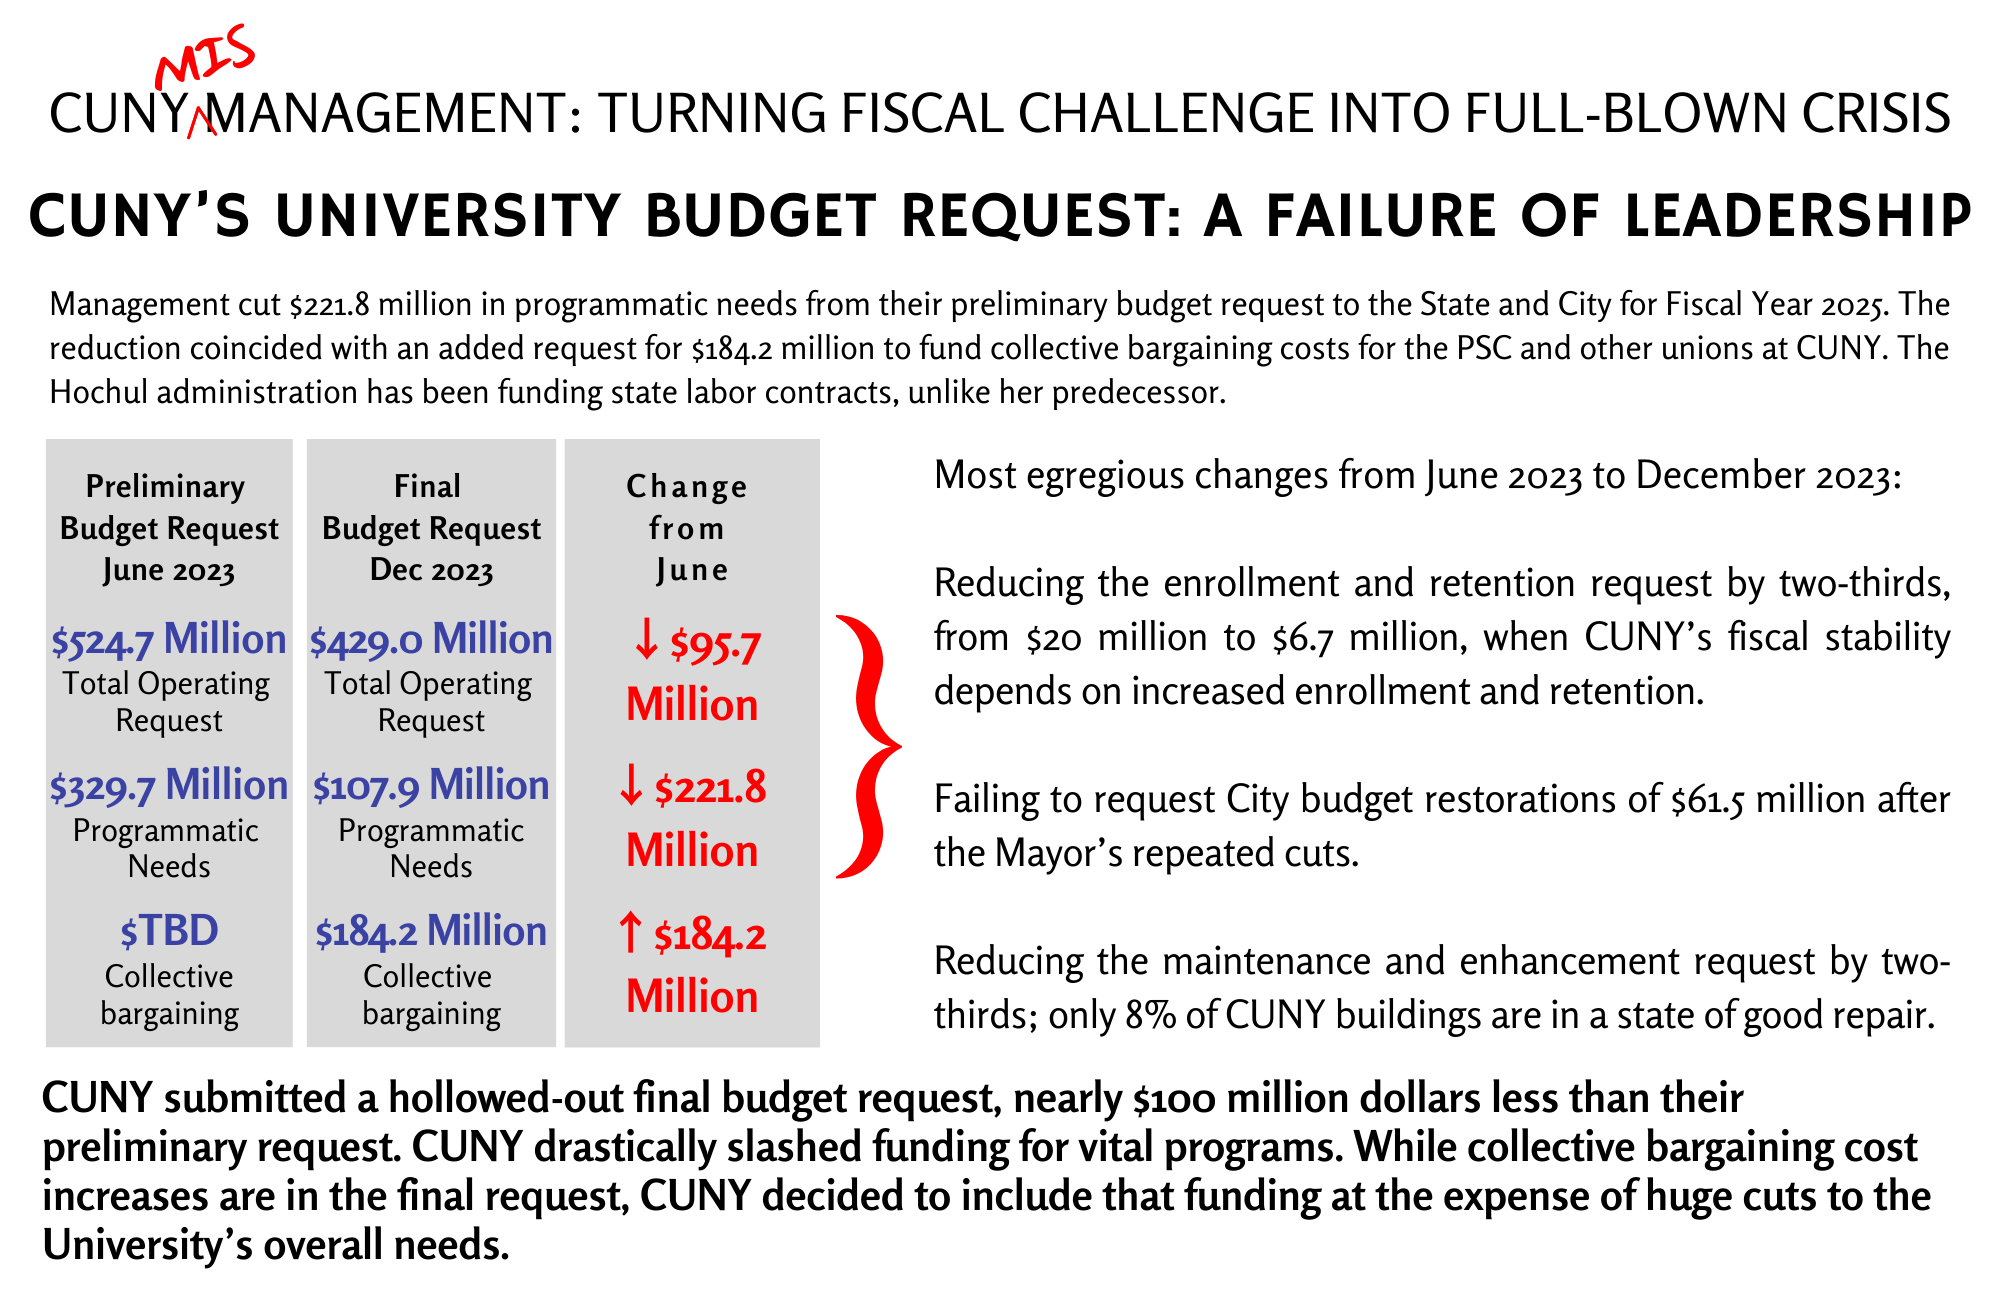 CUNY submitted a hollowed-out final budget request, nearly $100 million dollars less than their preliminary request. CUNY drastically slashed funding for vital programs. While collective bargaining cost increases are in the final request, CUNY decided to include that funding at the expense of huge cuts to the University’s overall needs.